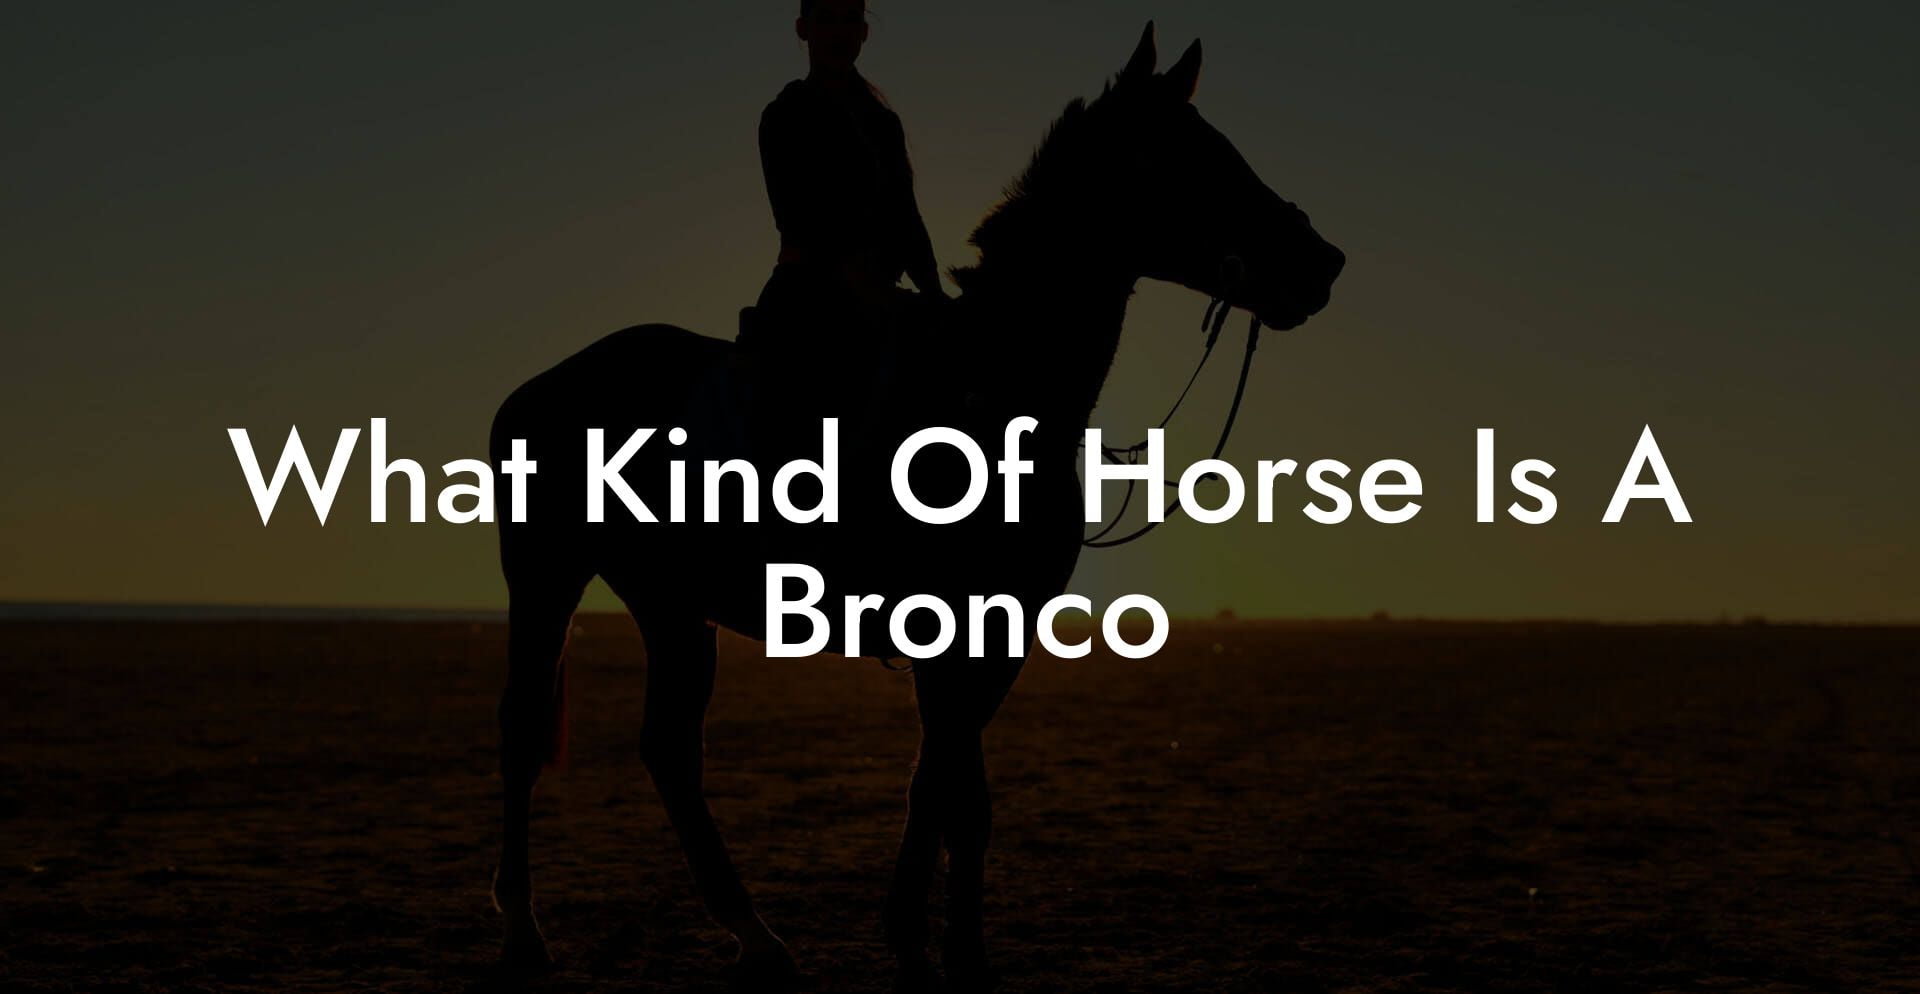 What Kind Of Horse Is A Bronco